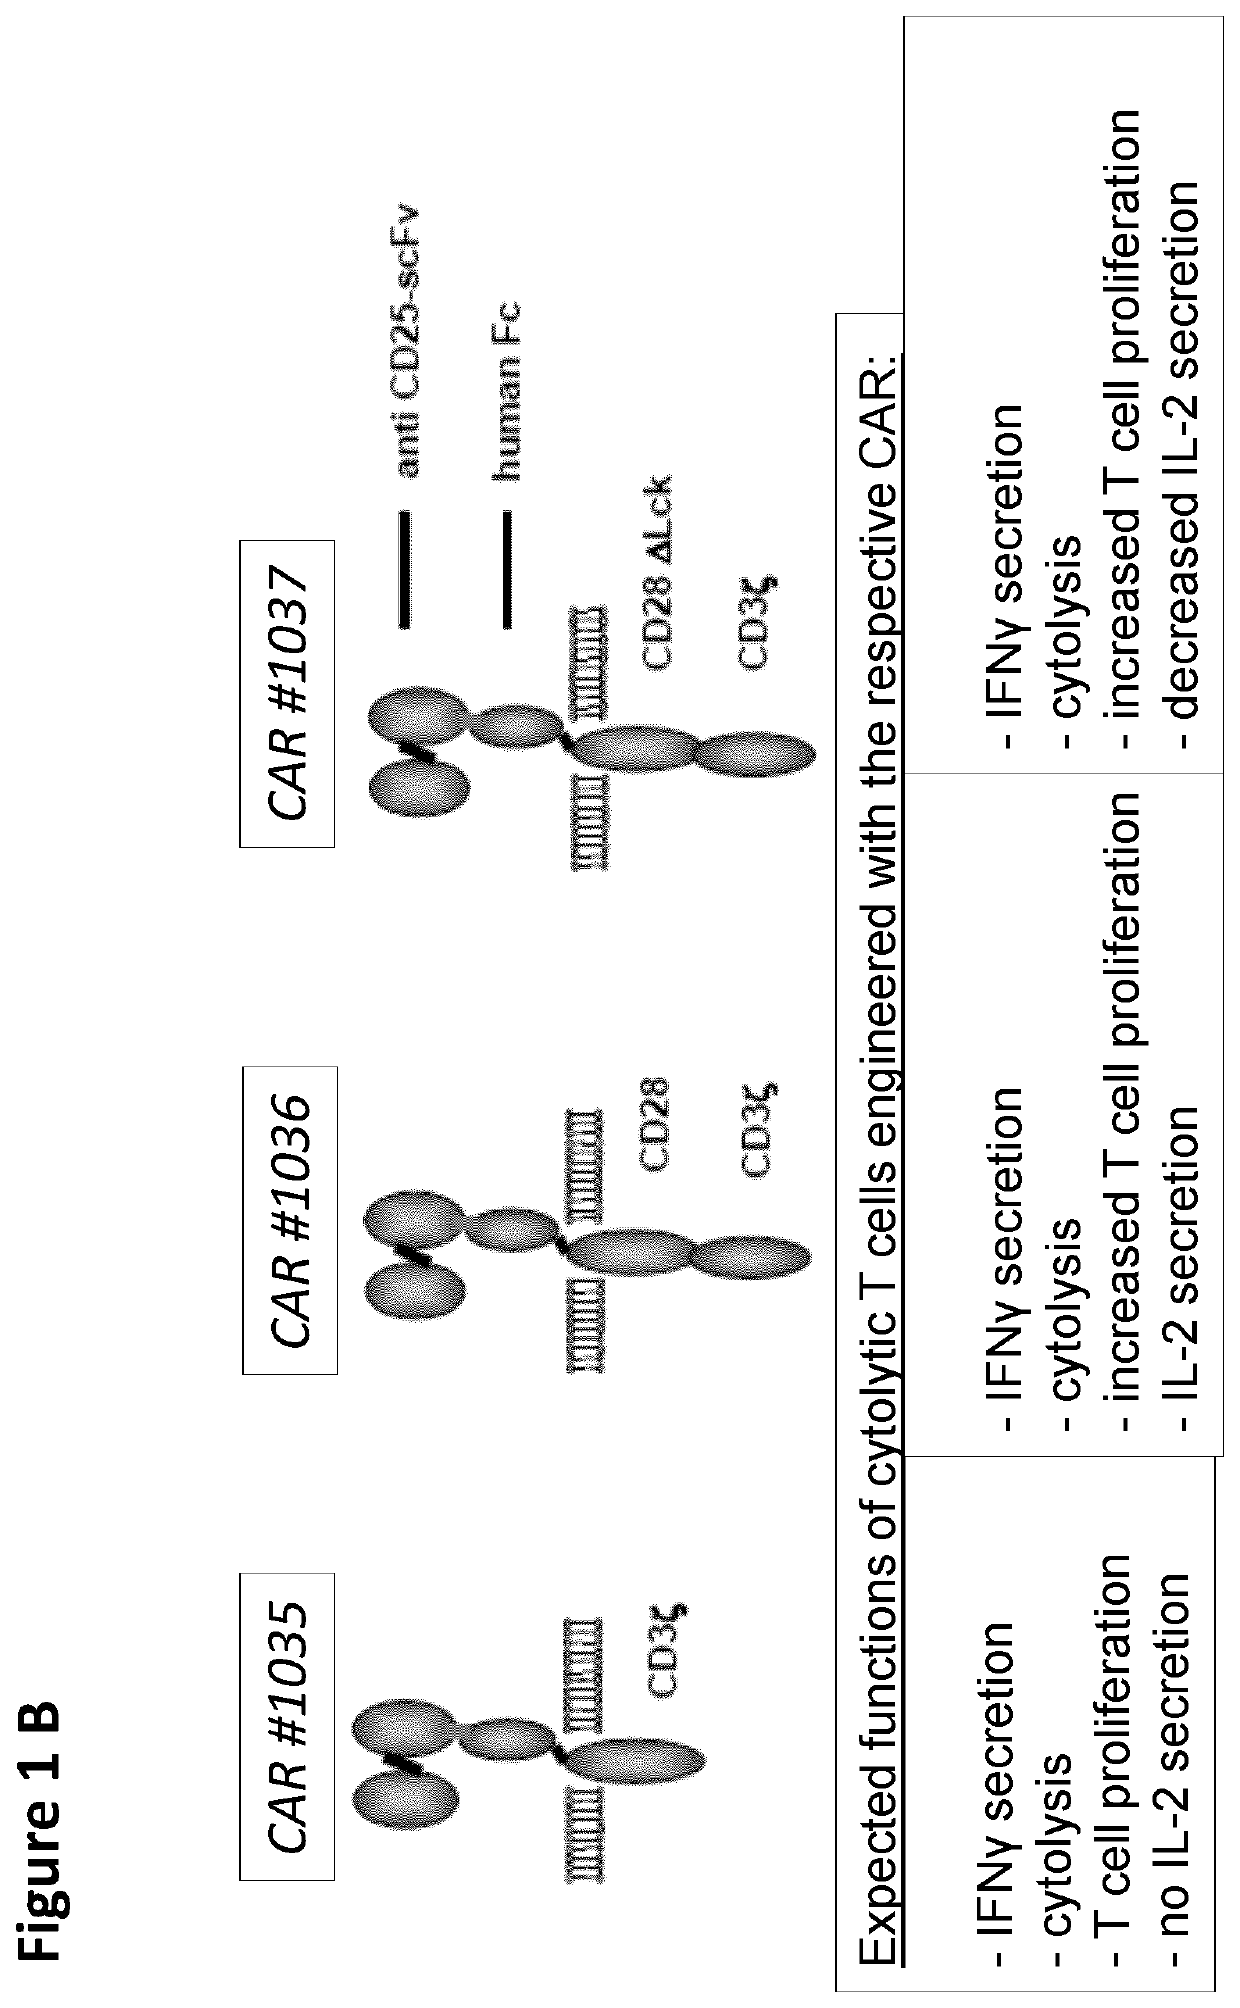 Cd25-specific chimeric antigen receptors and their uses